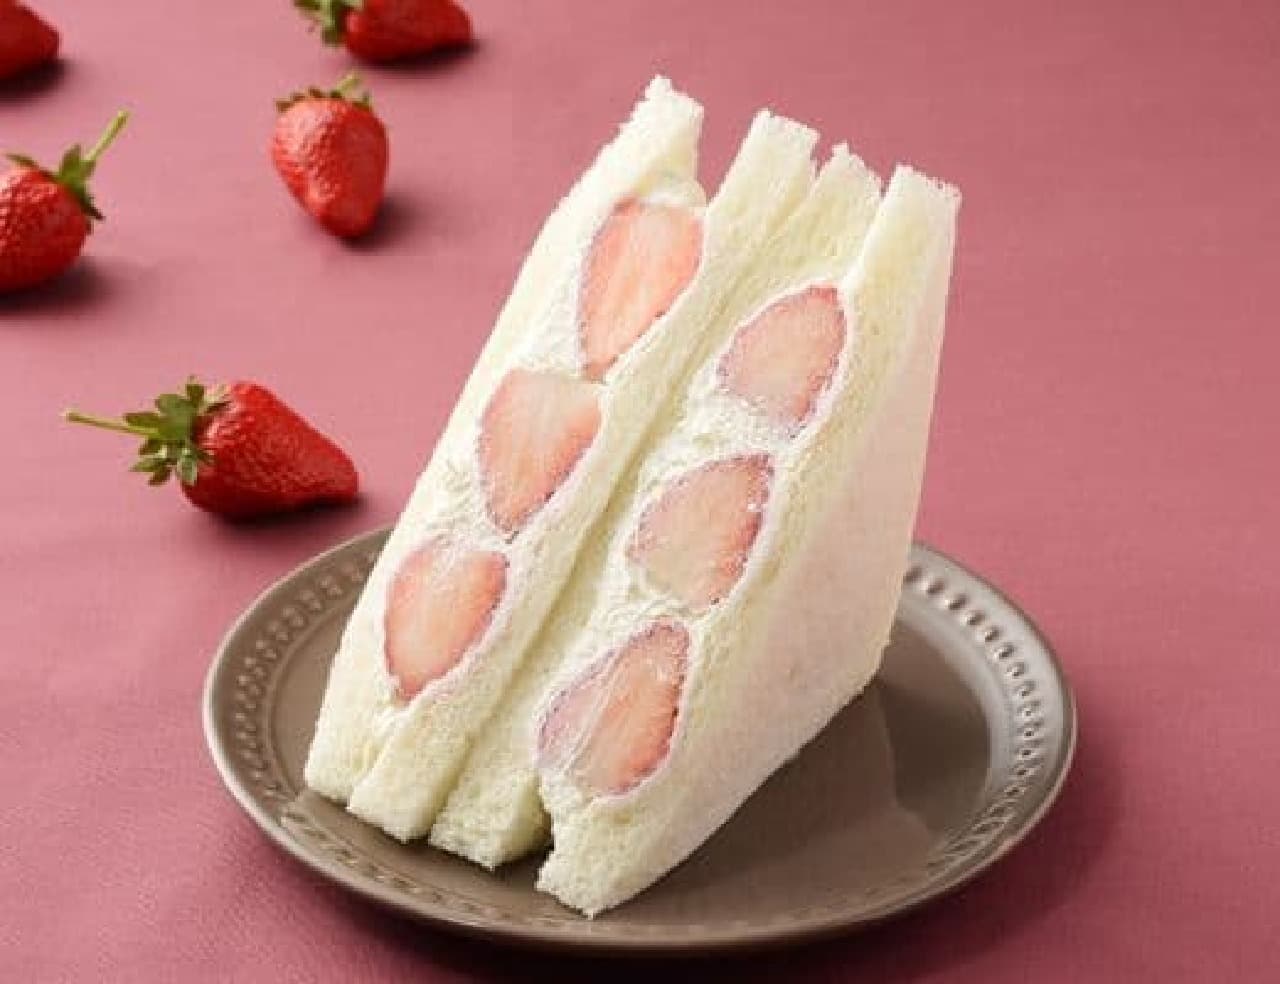 LAWSON "Fruit Sandwich - Strawberry and Whipped Cream